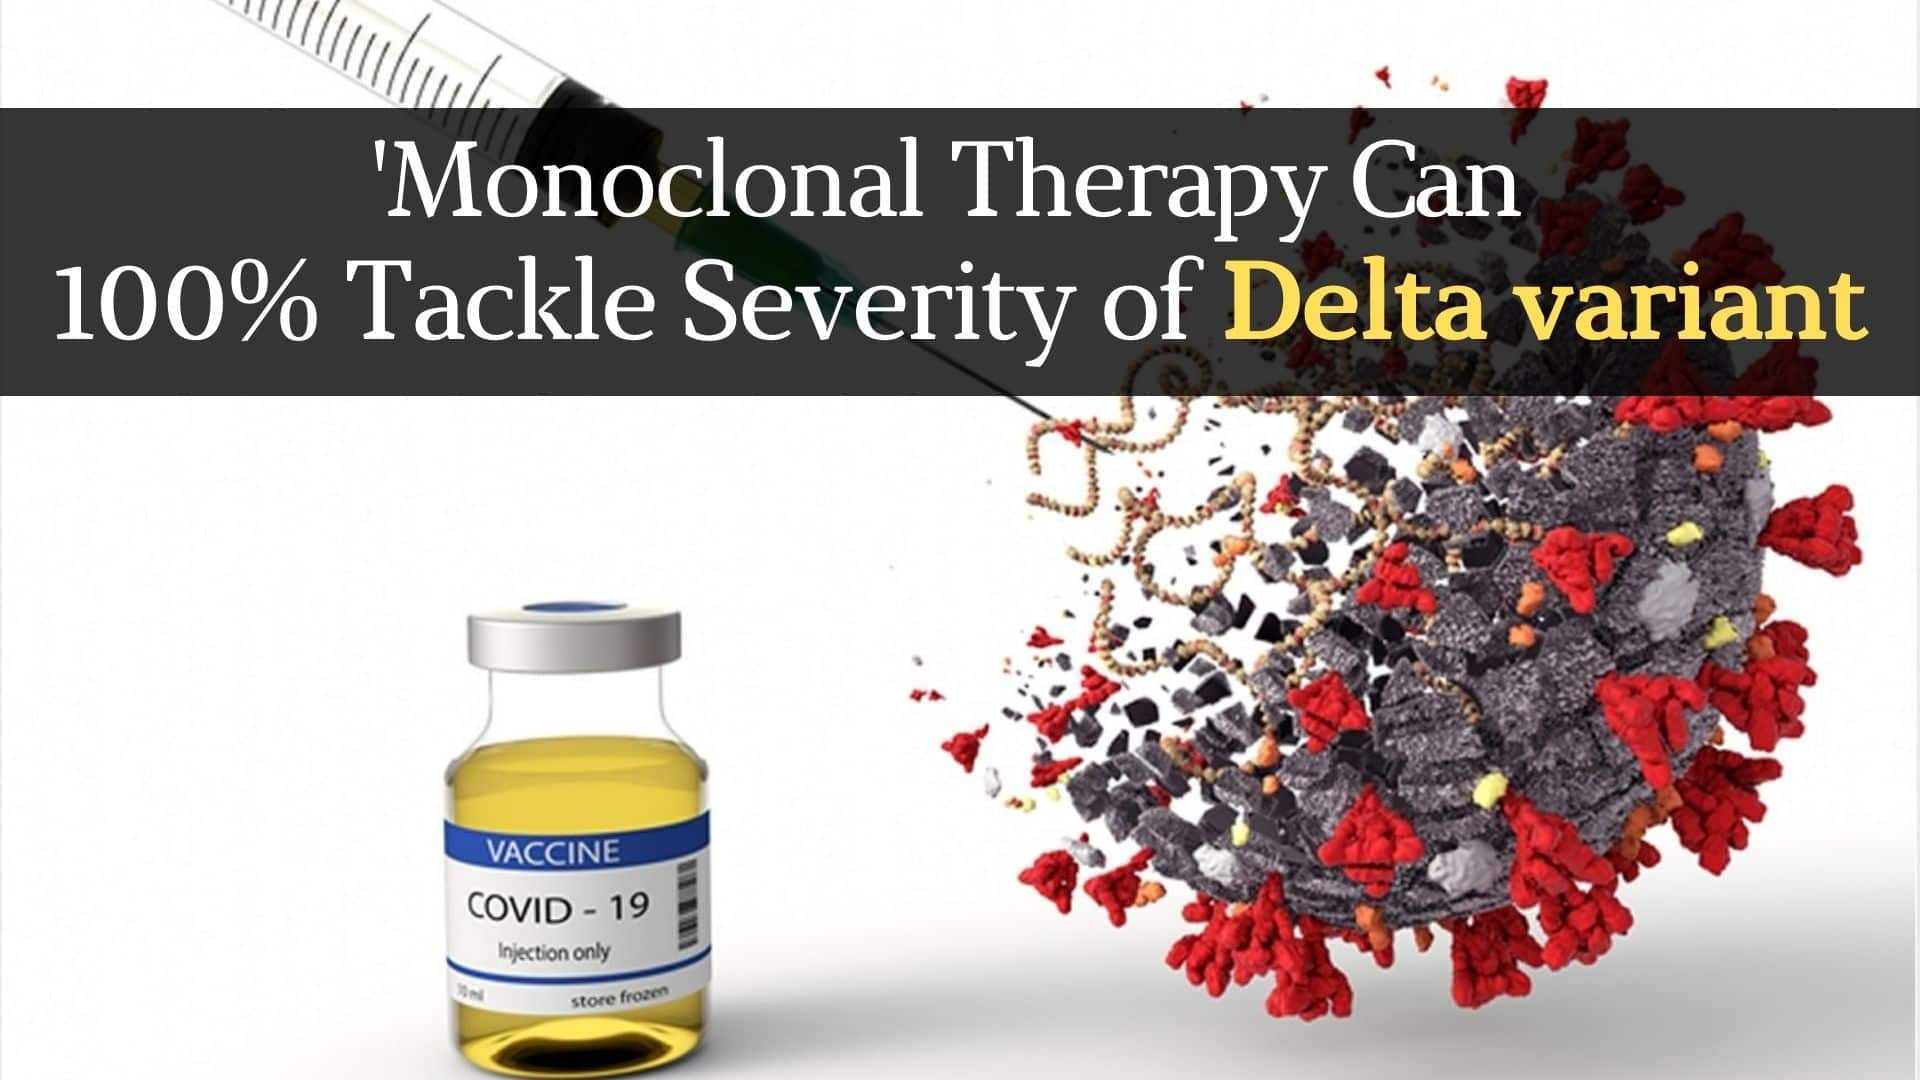 COVID-19 Live Updates: Highly Virulent Delta Variant Cases Surge Worldwide, Experts Say Monoclonal Therapy Can 100% Tackle The Severity